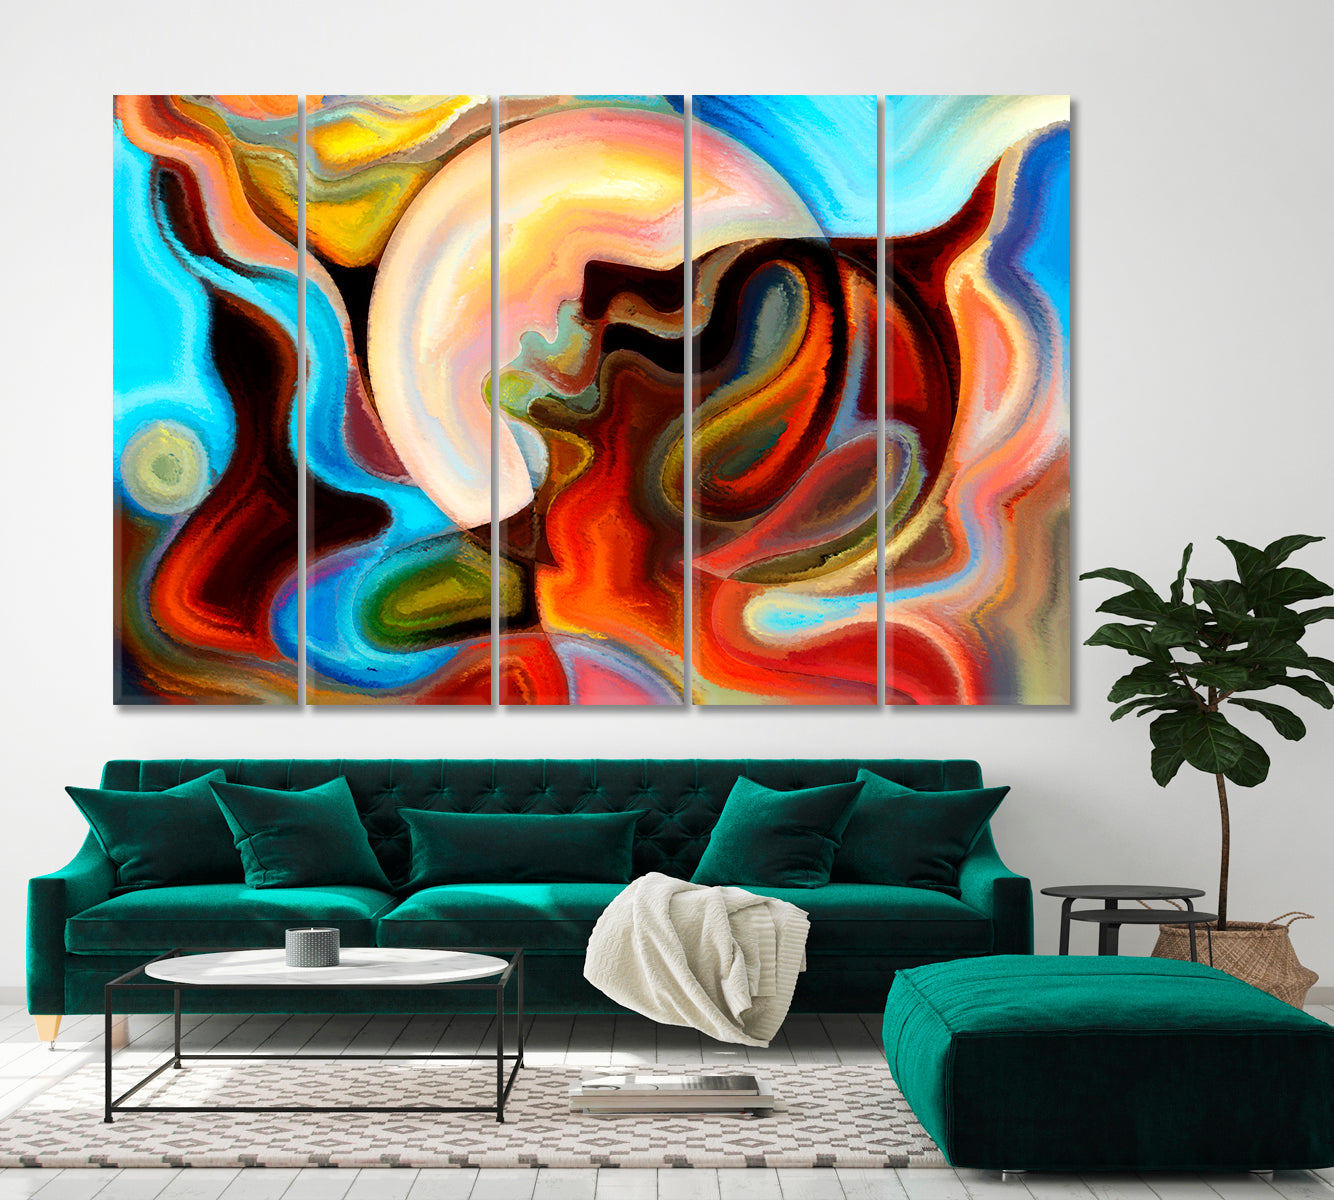 Human Face and Colors Colorful Abstraction Consciousness Art Artesty 5 panels 36" x 24" 